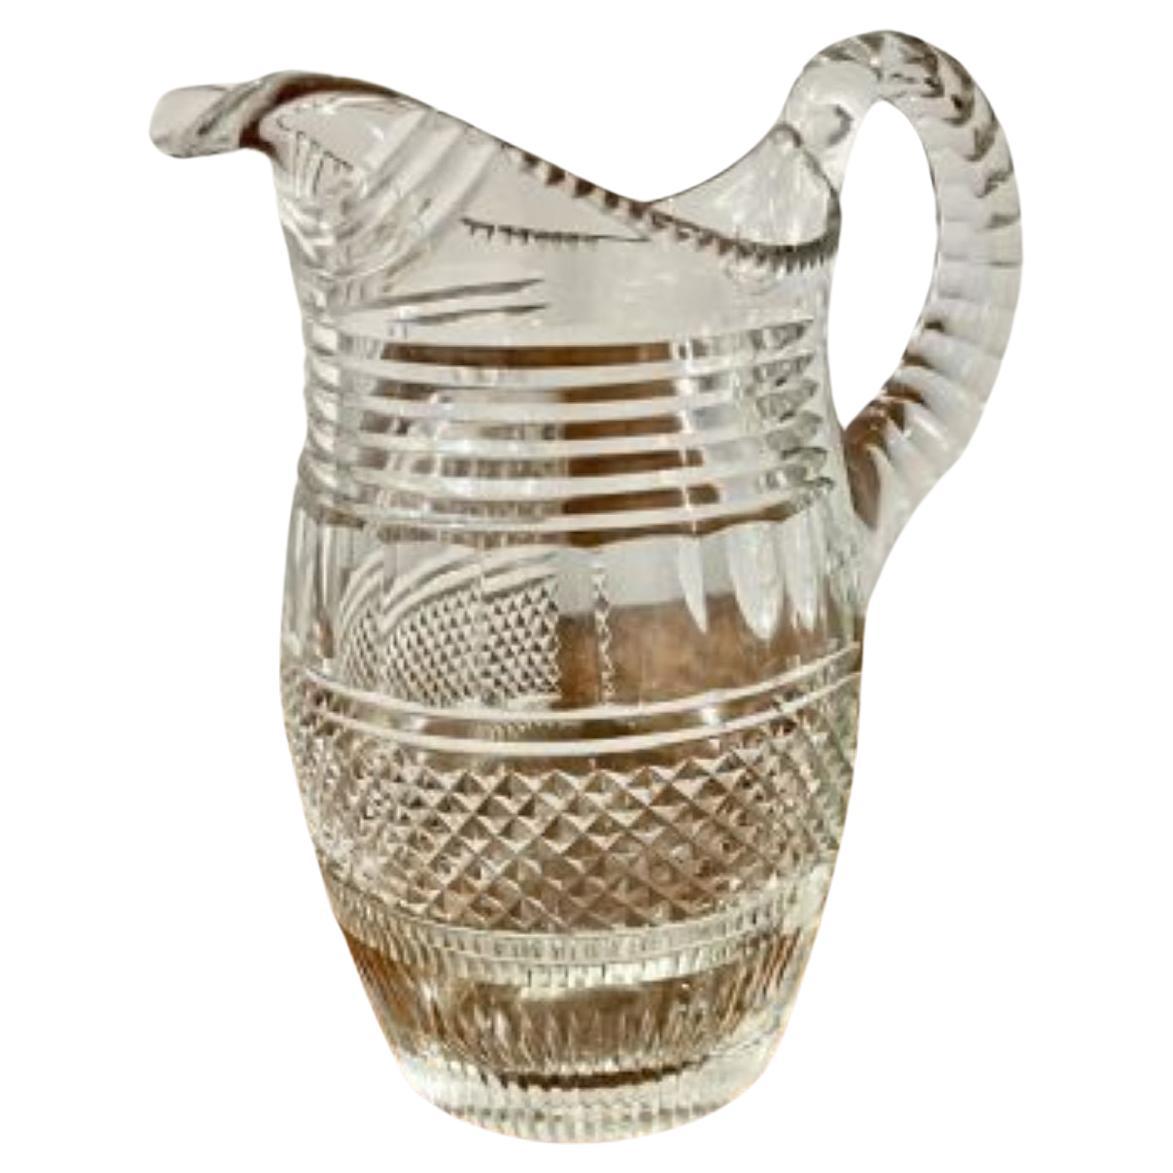 Superb quality antique Victorian cut glass water jug For Sale